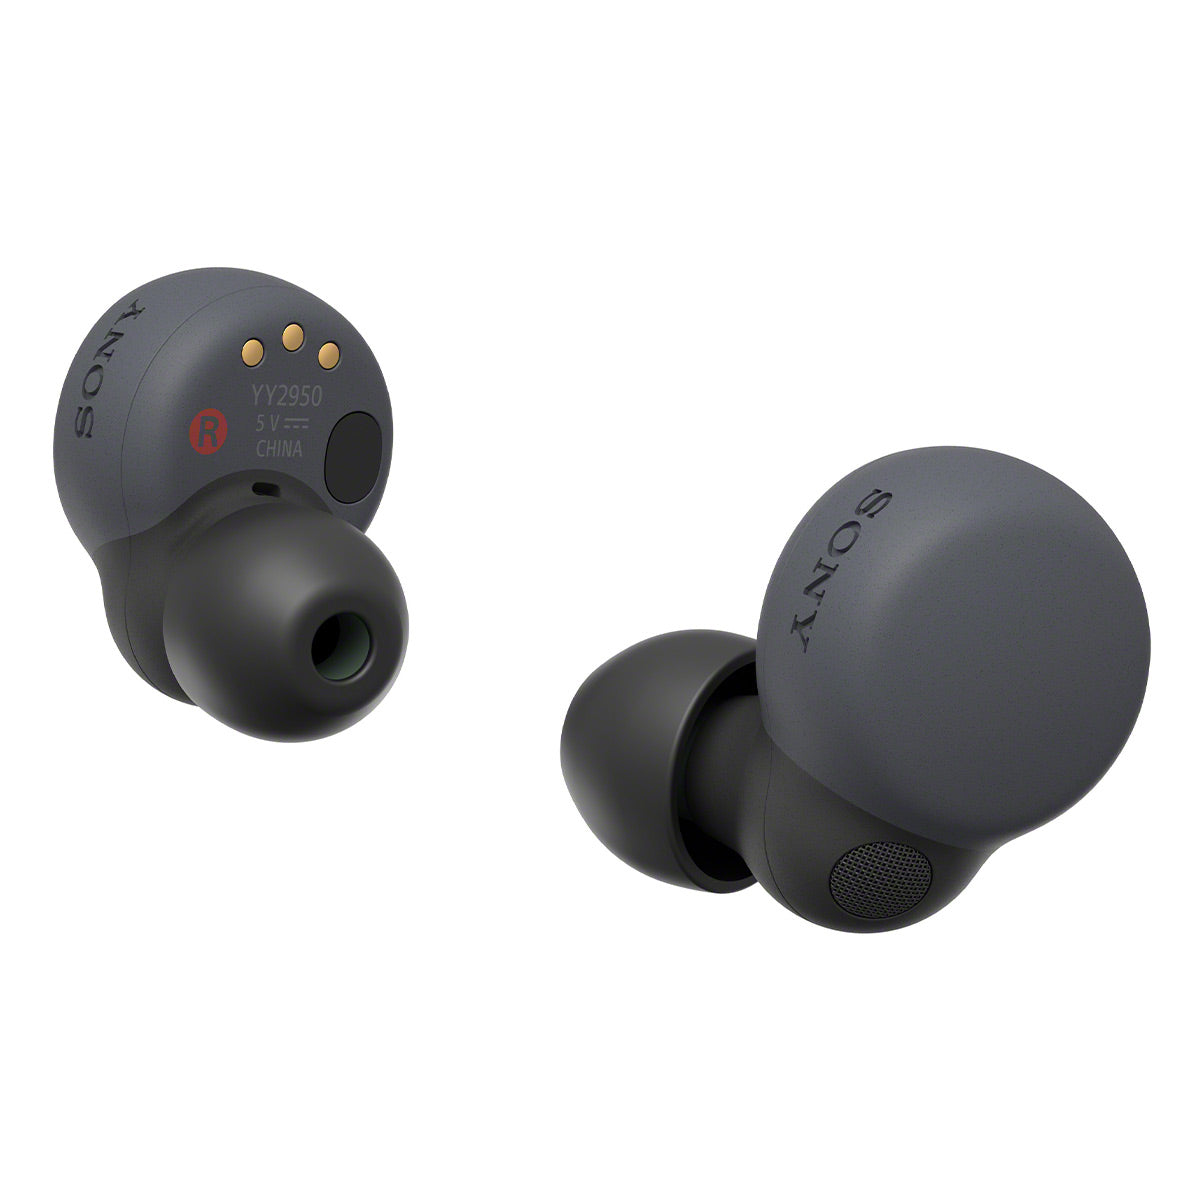 Sony LinkBuds S Truly Wireless Noise Canceling Earbuds (Black)